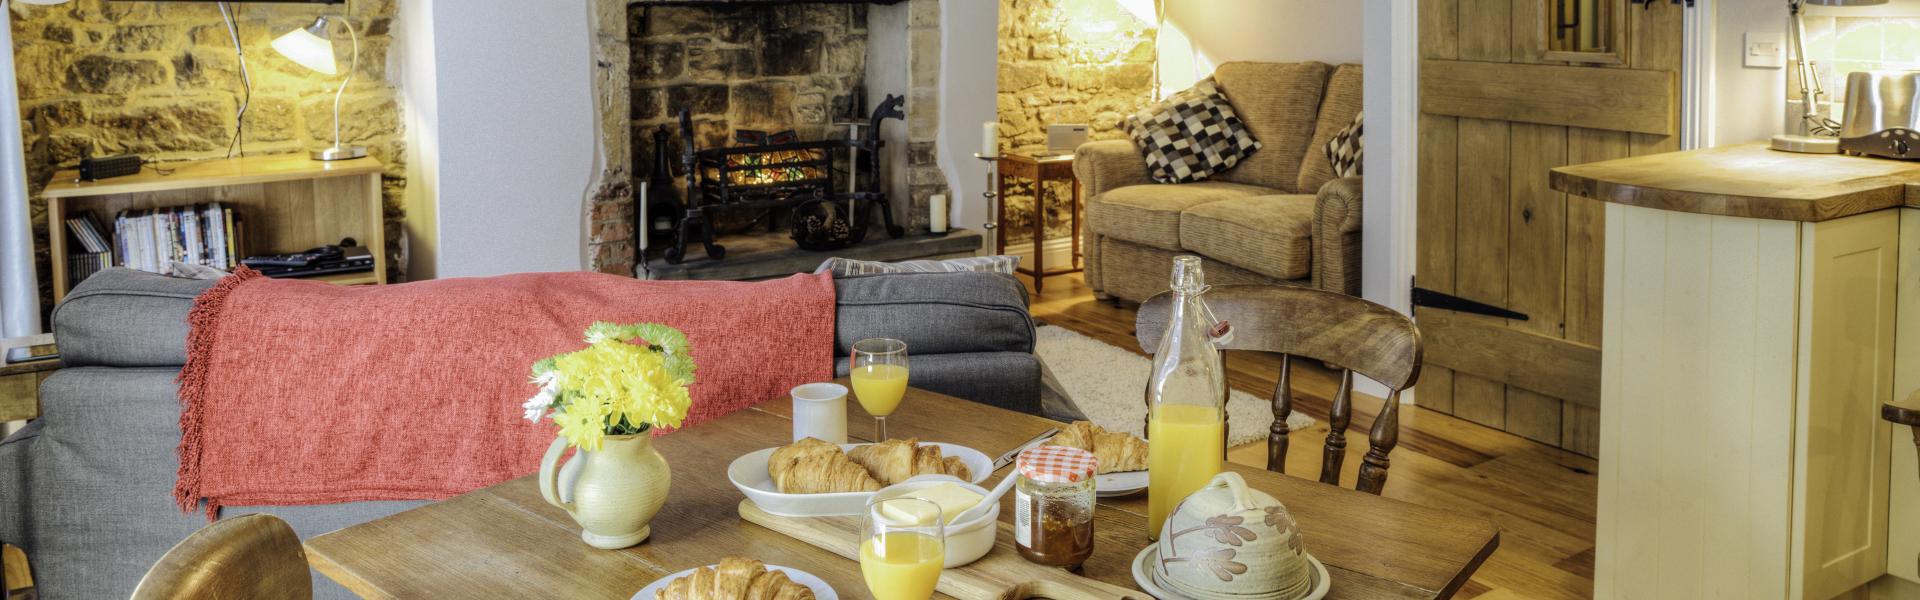 Bed and Breakfast Accommodation in Somerset - HomeToGo